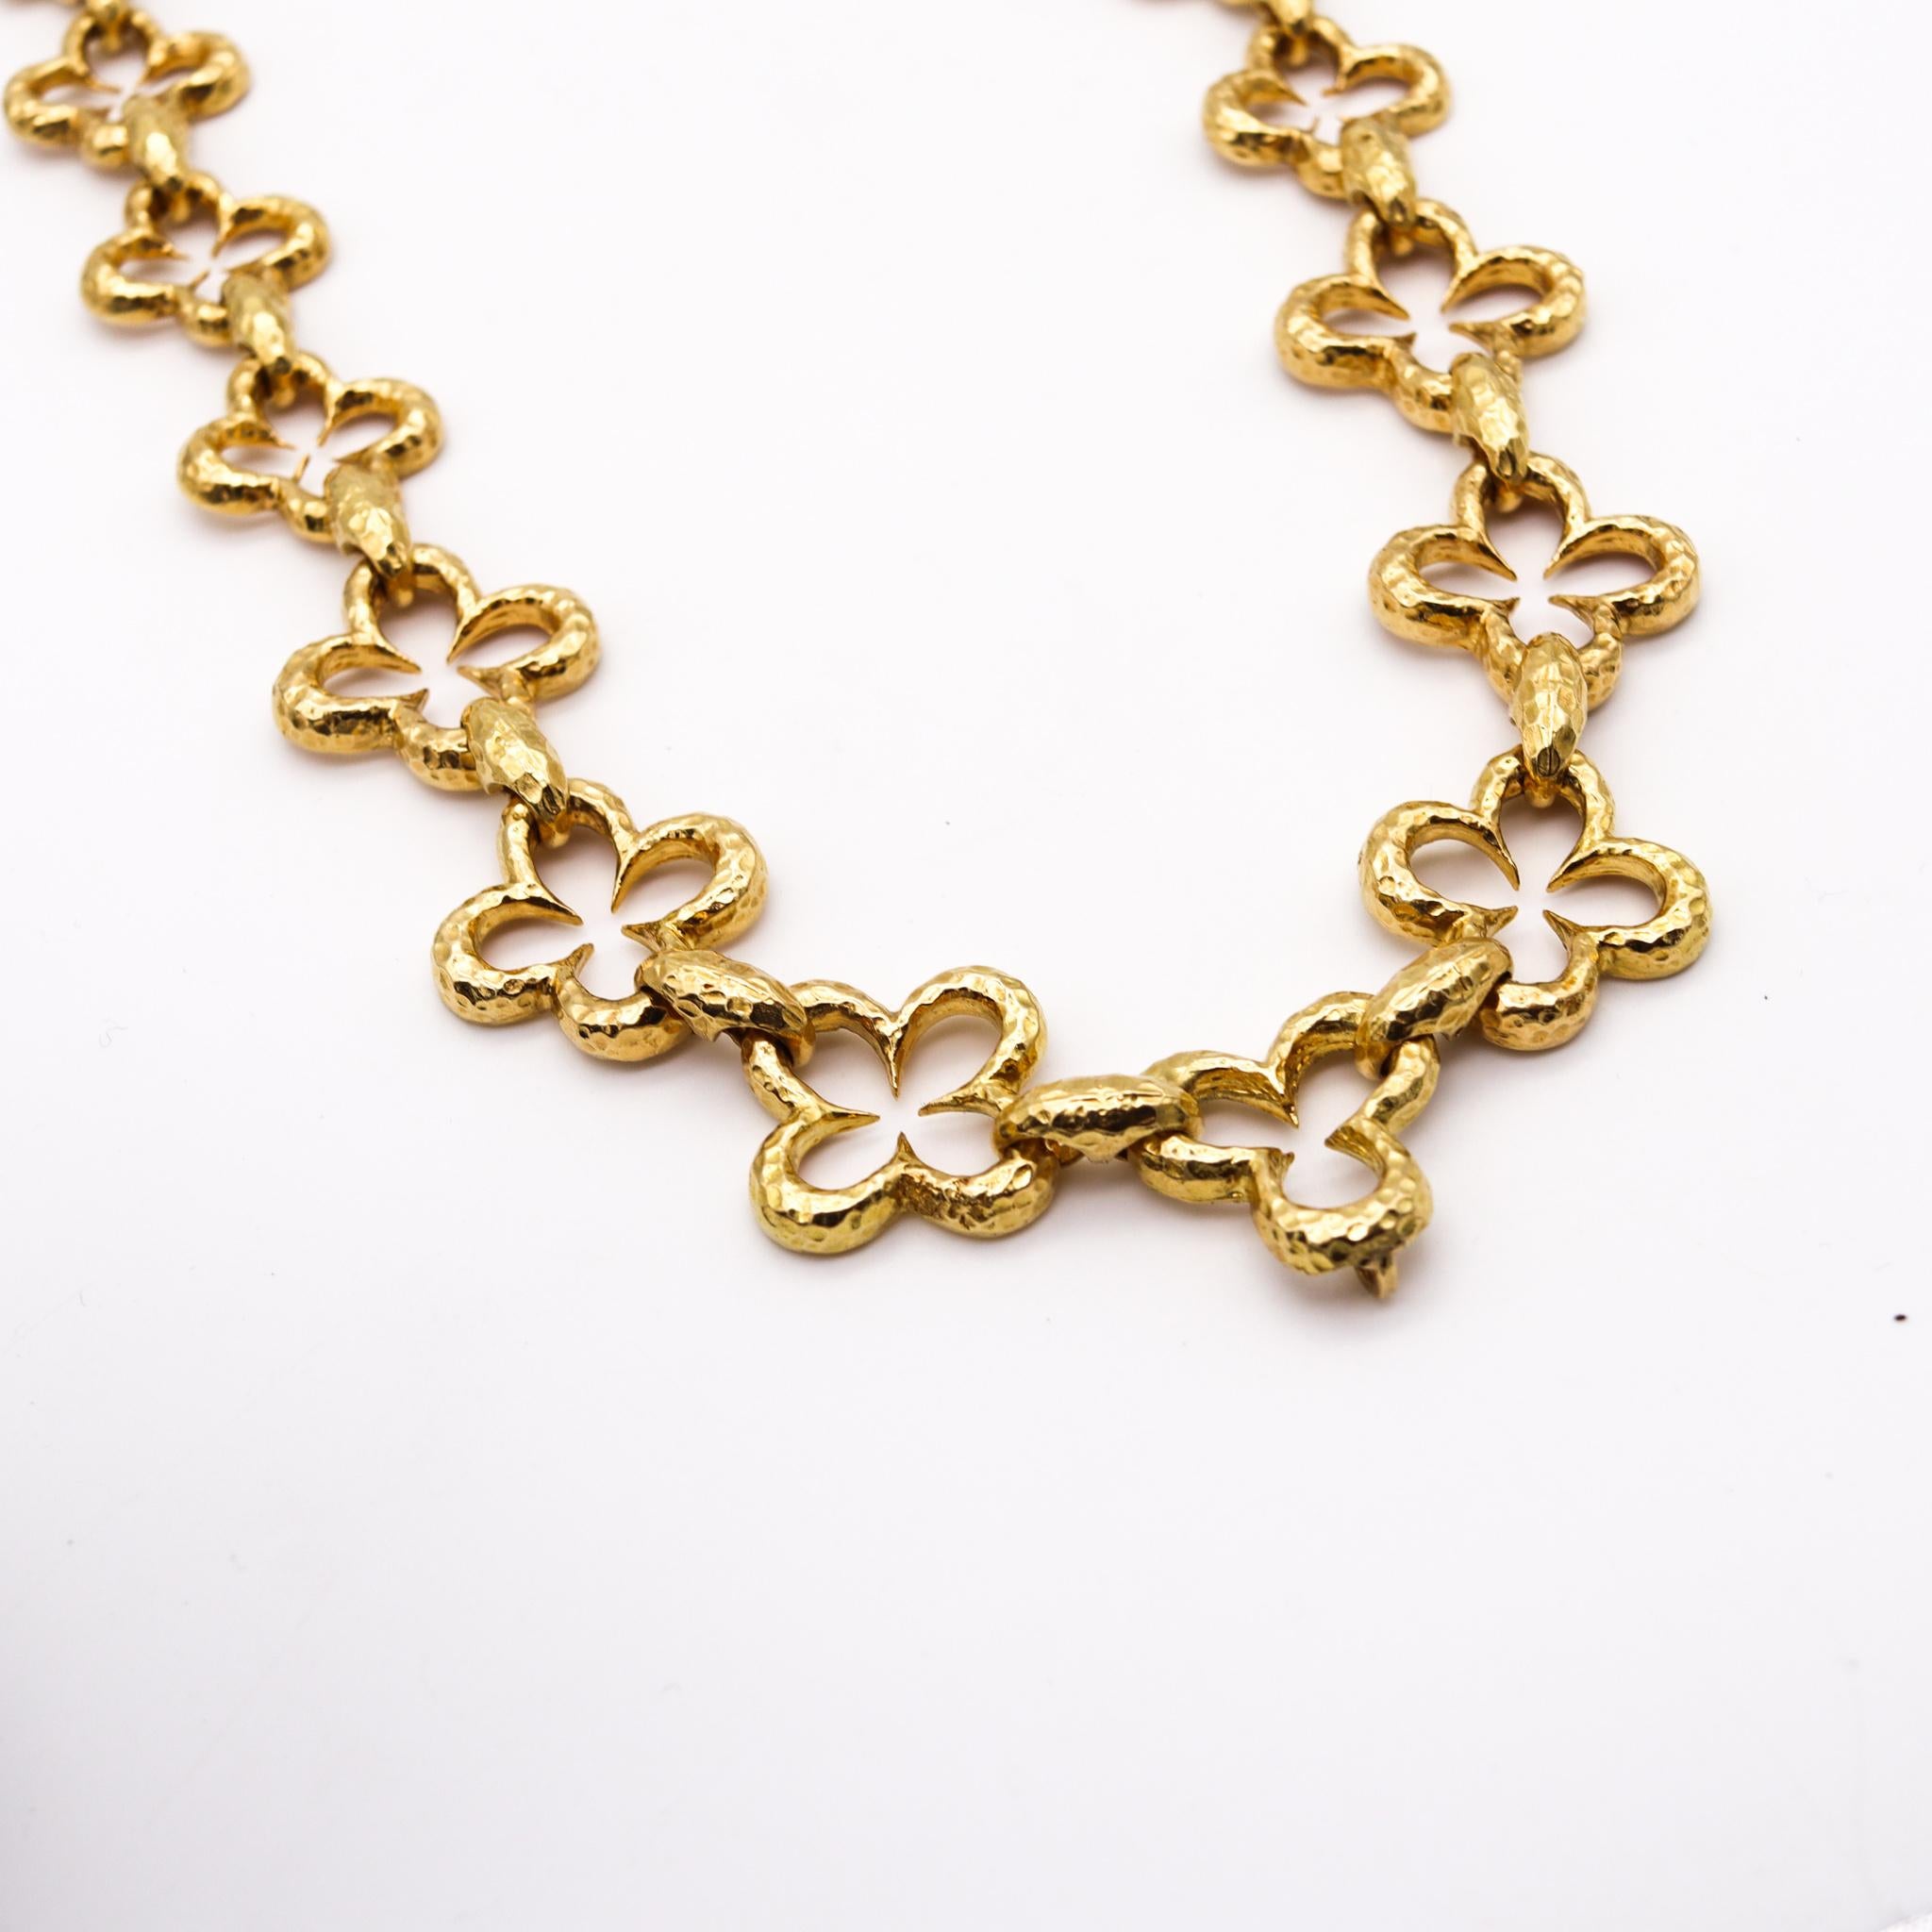 Graduated alhambra convertible necklace designed by Wander France.

Fabulous graduated necklace, created by the jewelry designer of Wander France during the mid century period, back in the late 1960. This convertible necklace has been build it up